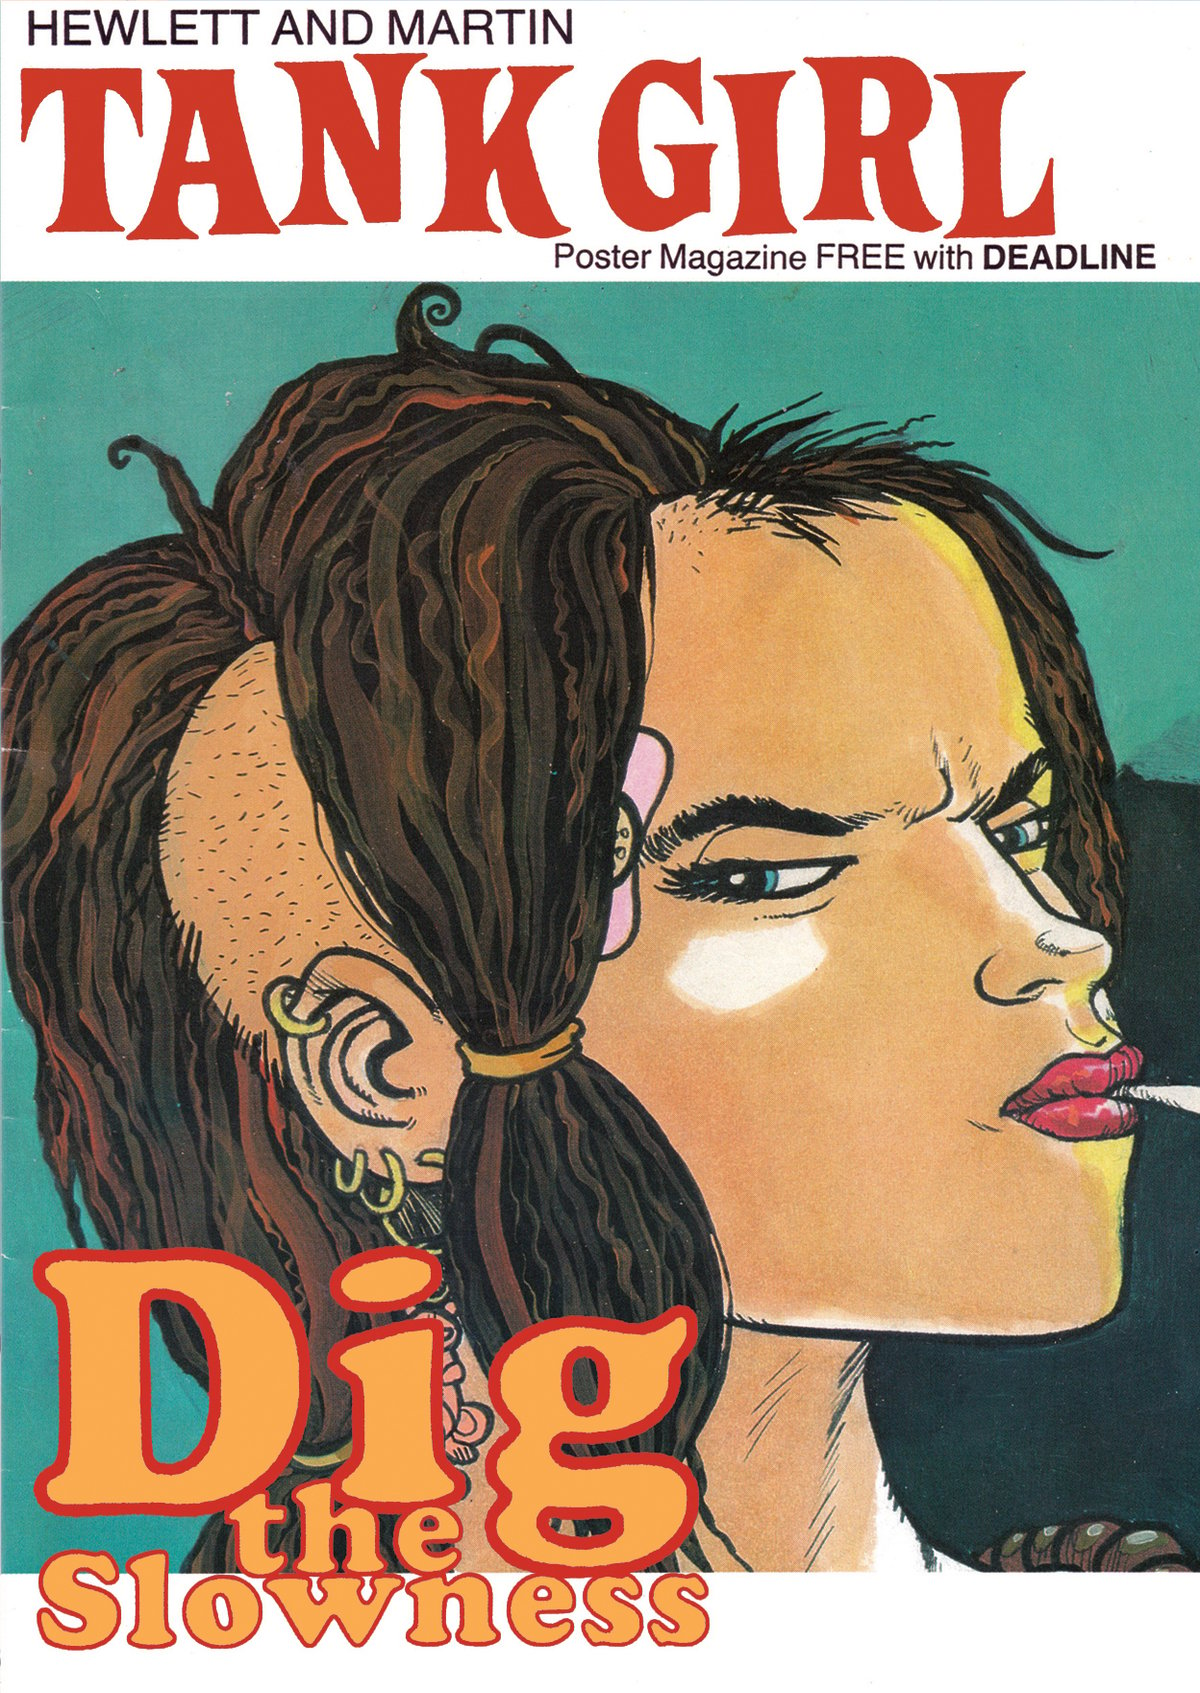 Image of Fresh Hot Tank Girl - Poster Magazine Special - with bonus Dig The Slowness Pocket Poster Mag!